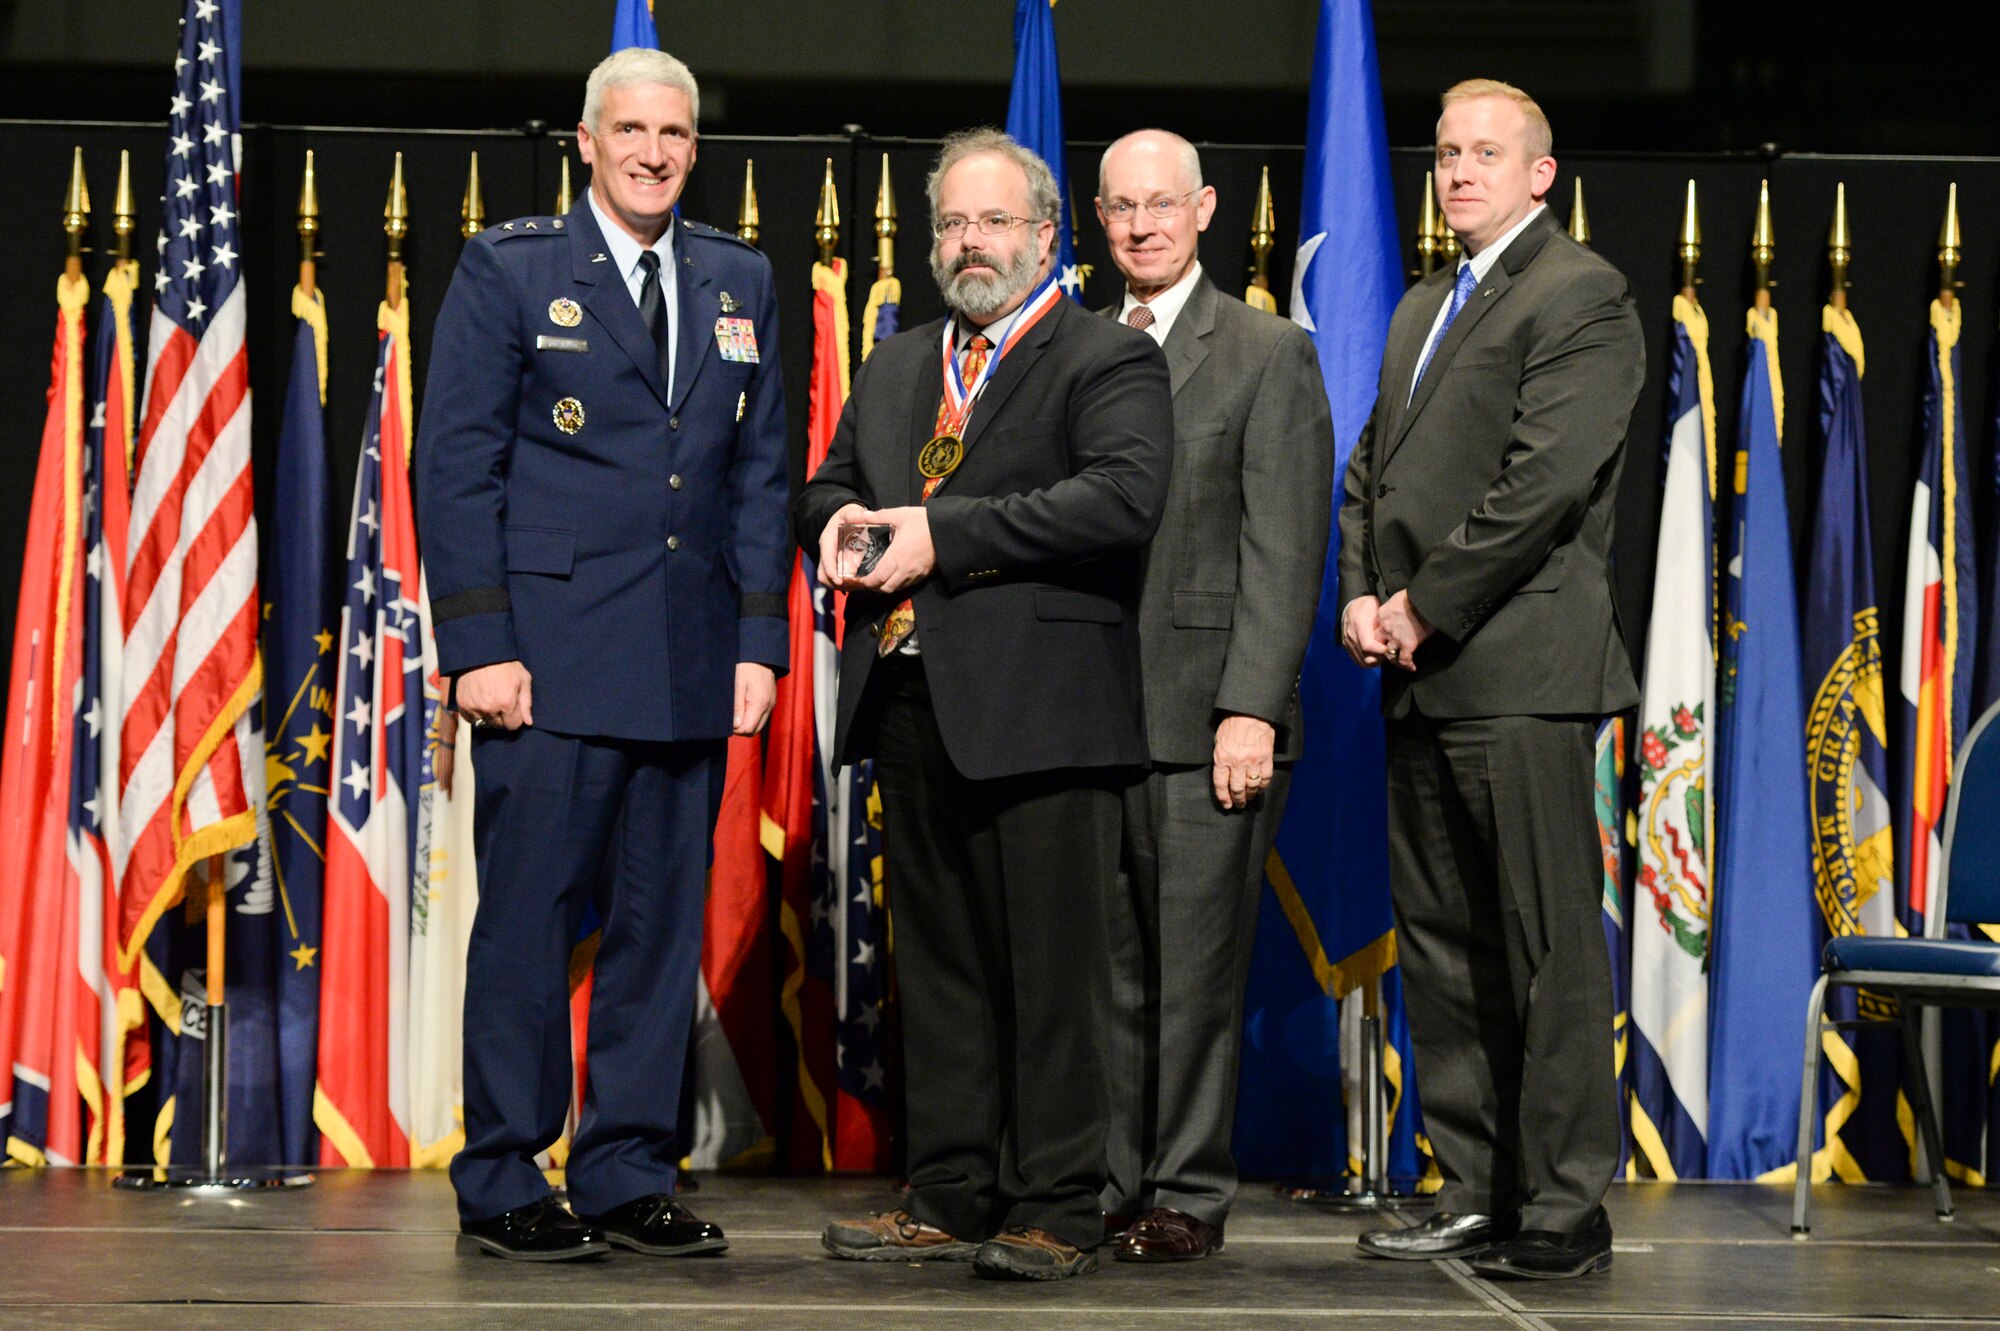 Mr. Ralph Kohler, principal engineer, Air Force Research Laboratory Information Directorate, is honored during the 2014 AFRL Fellows and Early Career Awards Banquet, Oct. 30 at the National Museum of the U.S. Air Force. Joining him are Maj. Gen. Tom Masiello, AFRL commander, retired Maj. Gen. Dick Paul, AFRL's first commander, and Dr. Morley Stone, AFRL chief technology officer.  (U.S. Air Force photo/Wesley Farnsworth)